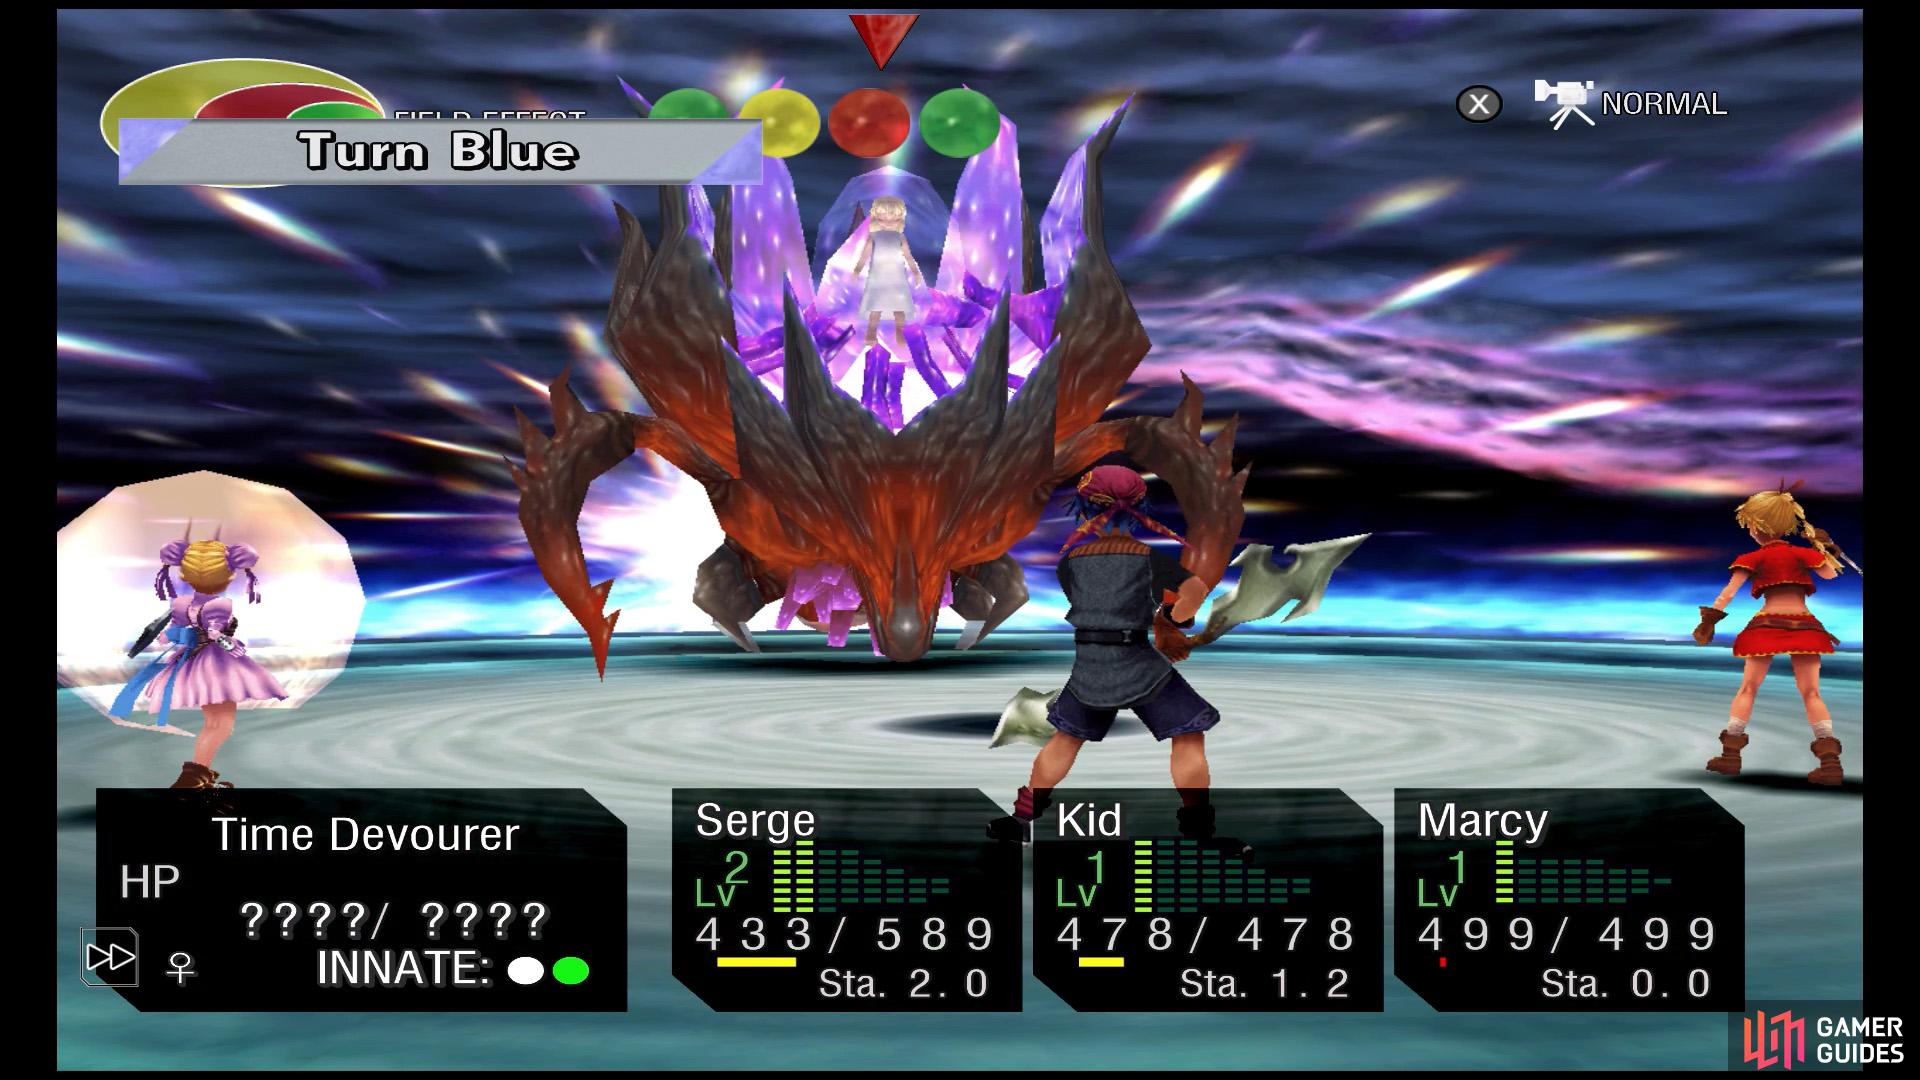 Chrono Cross: The Radical Dreamers Edition Trophy Guide & Road Map